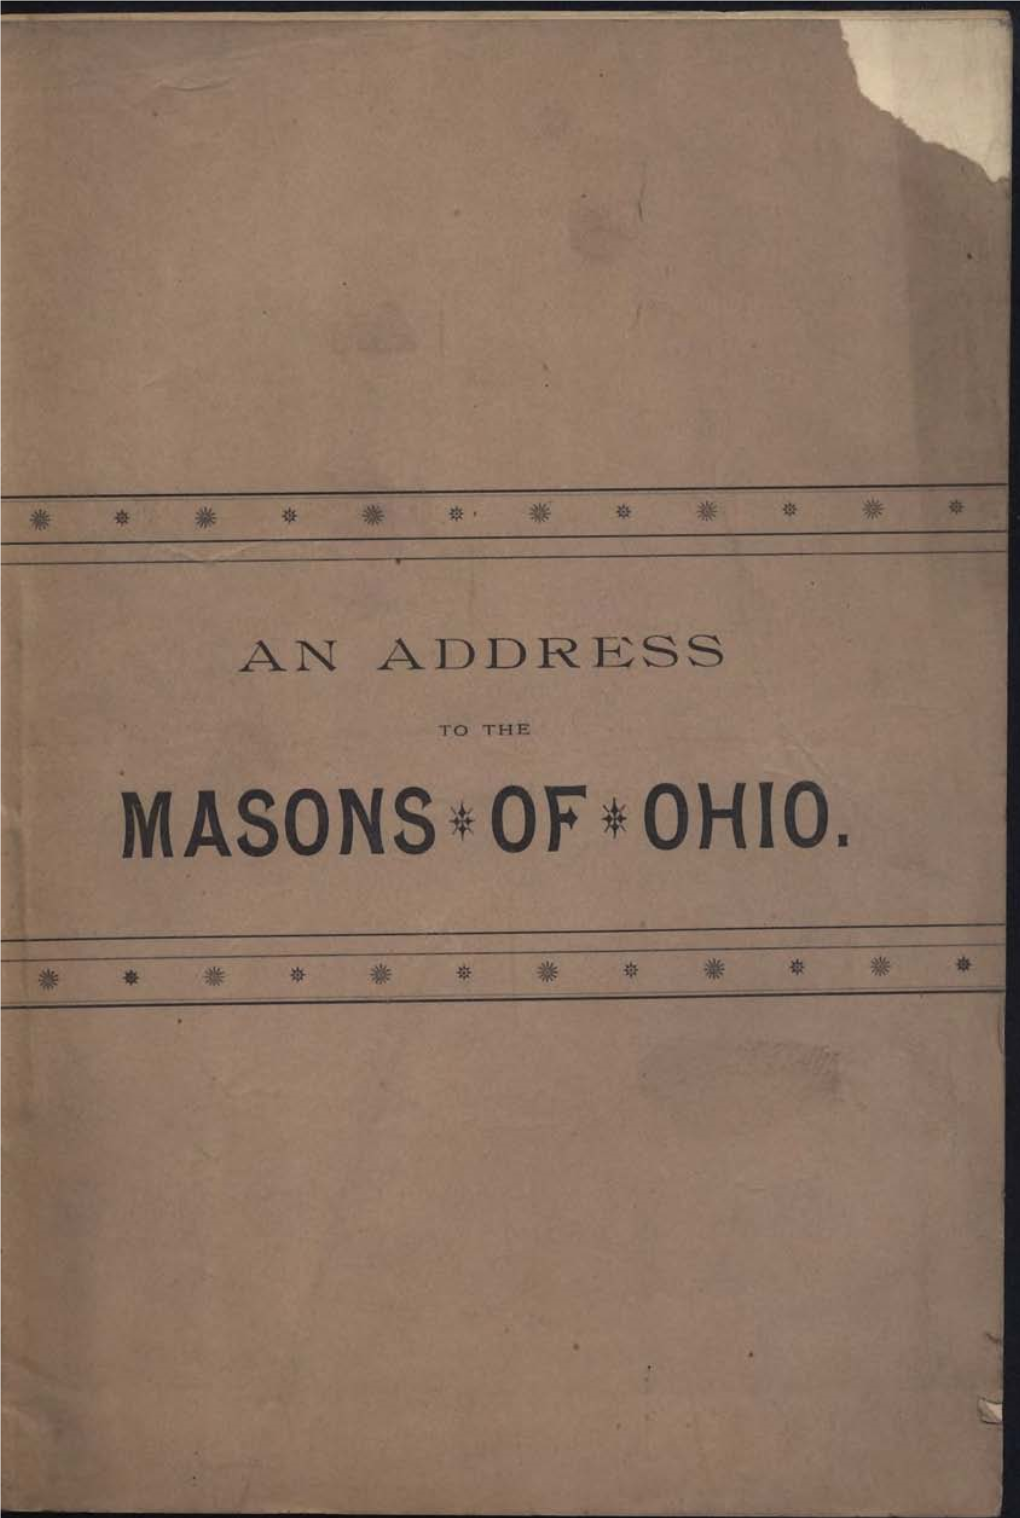 An Address to the Masons of Ohio – 1886